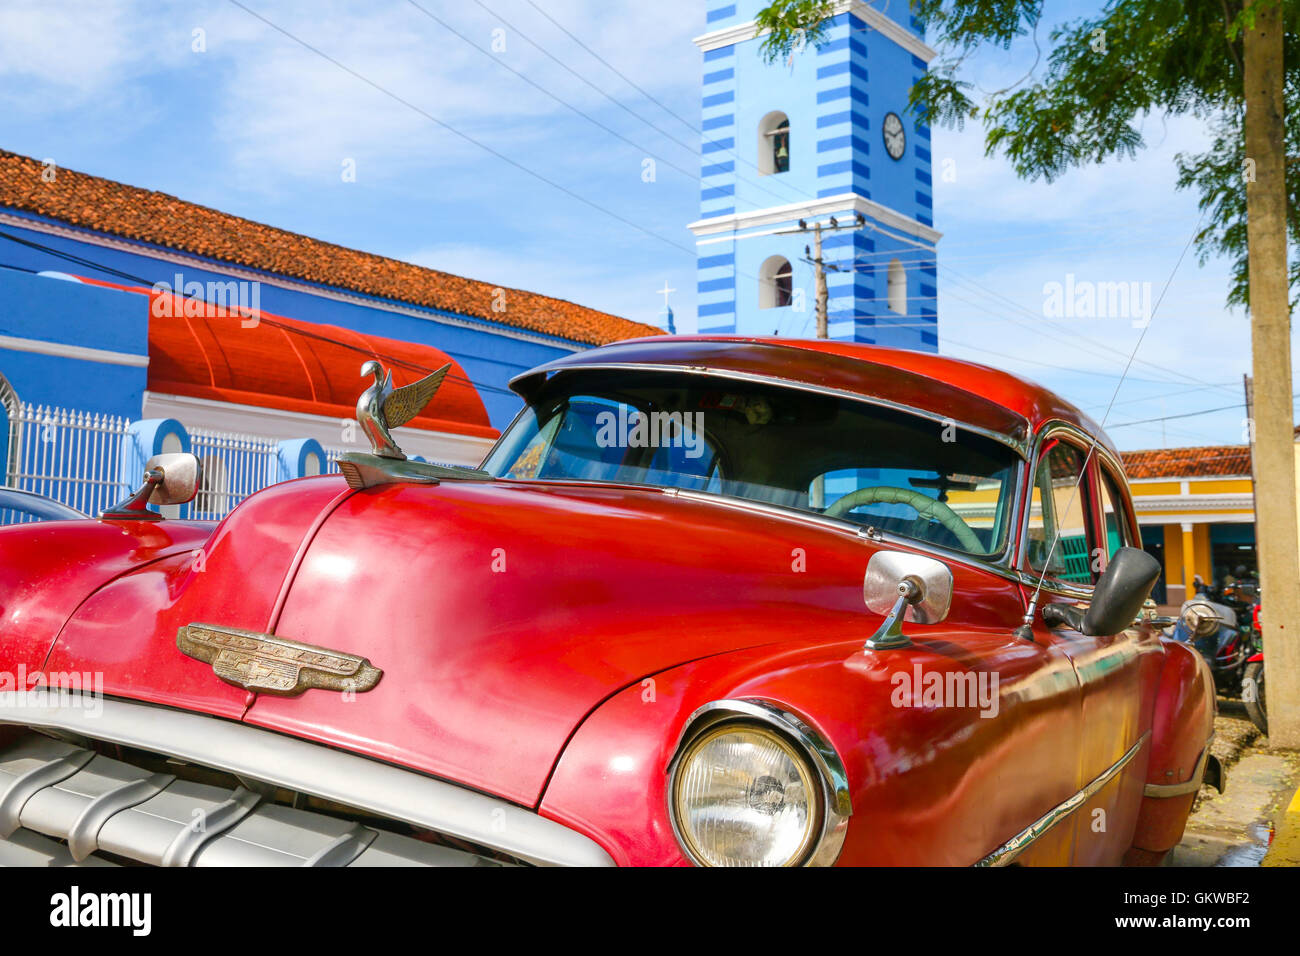 [Editorial Use Only] An old American Chevrolet Car in Sancti Spiritus, Cuba Stock Photo